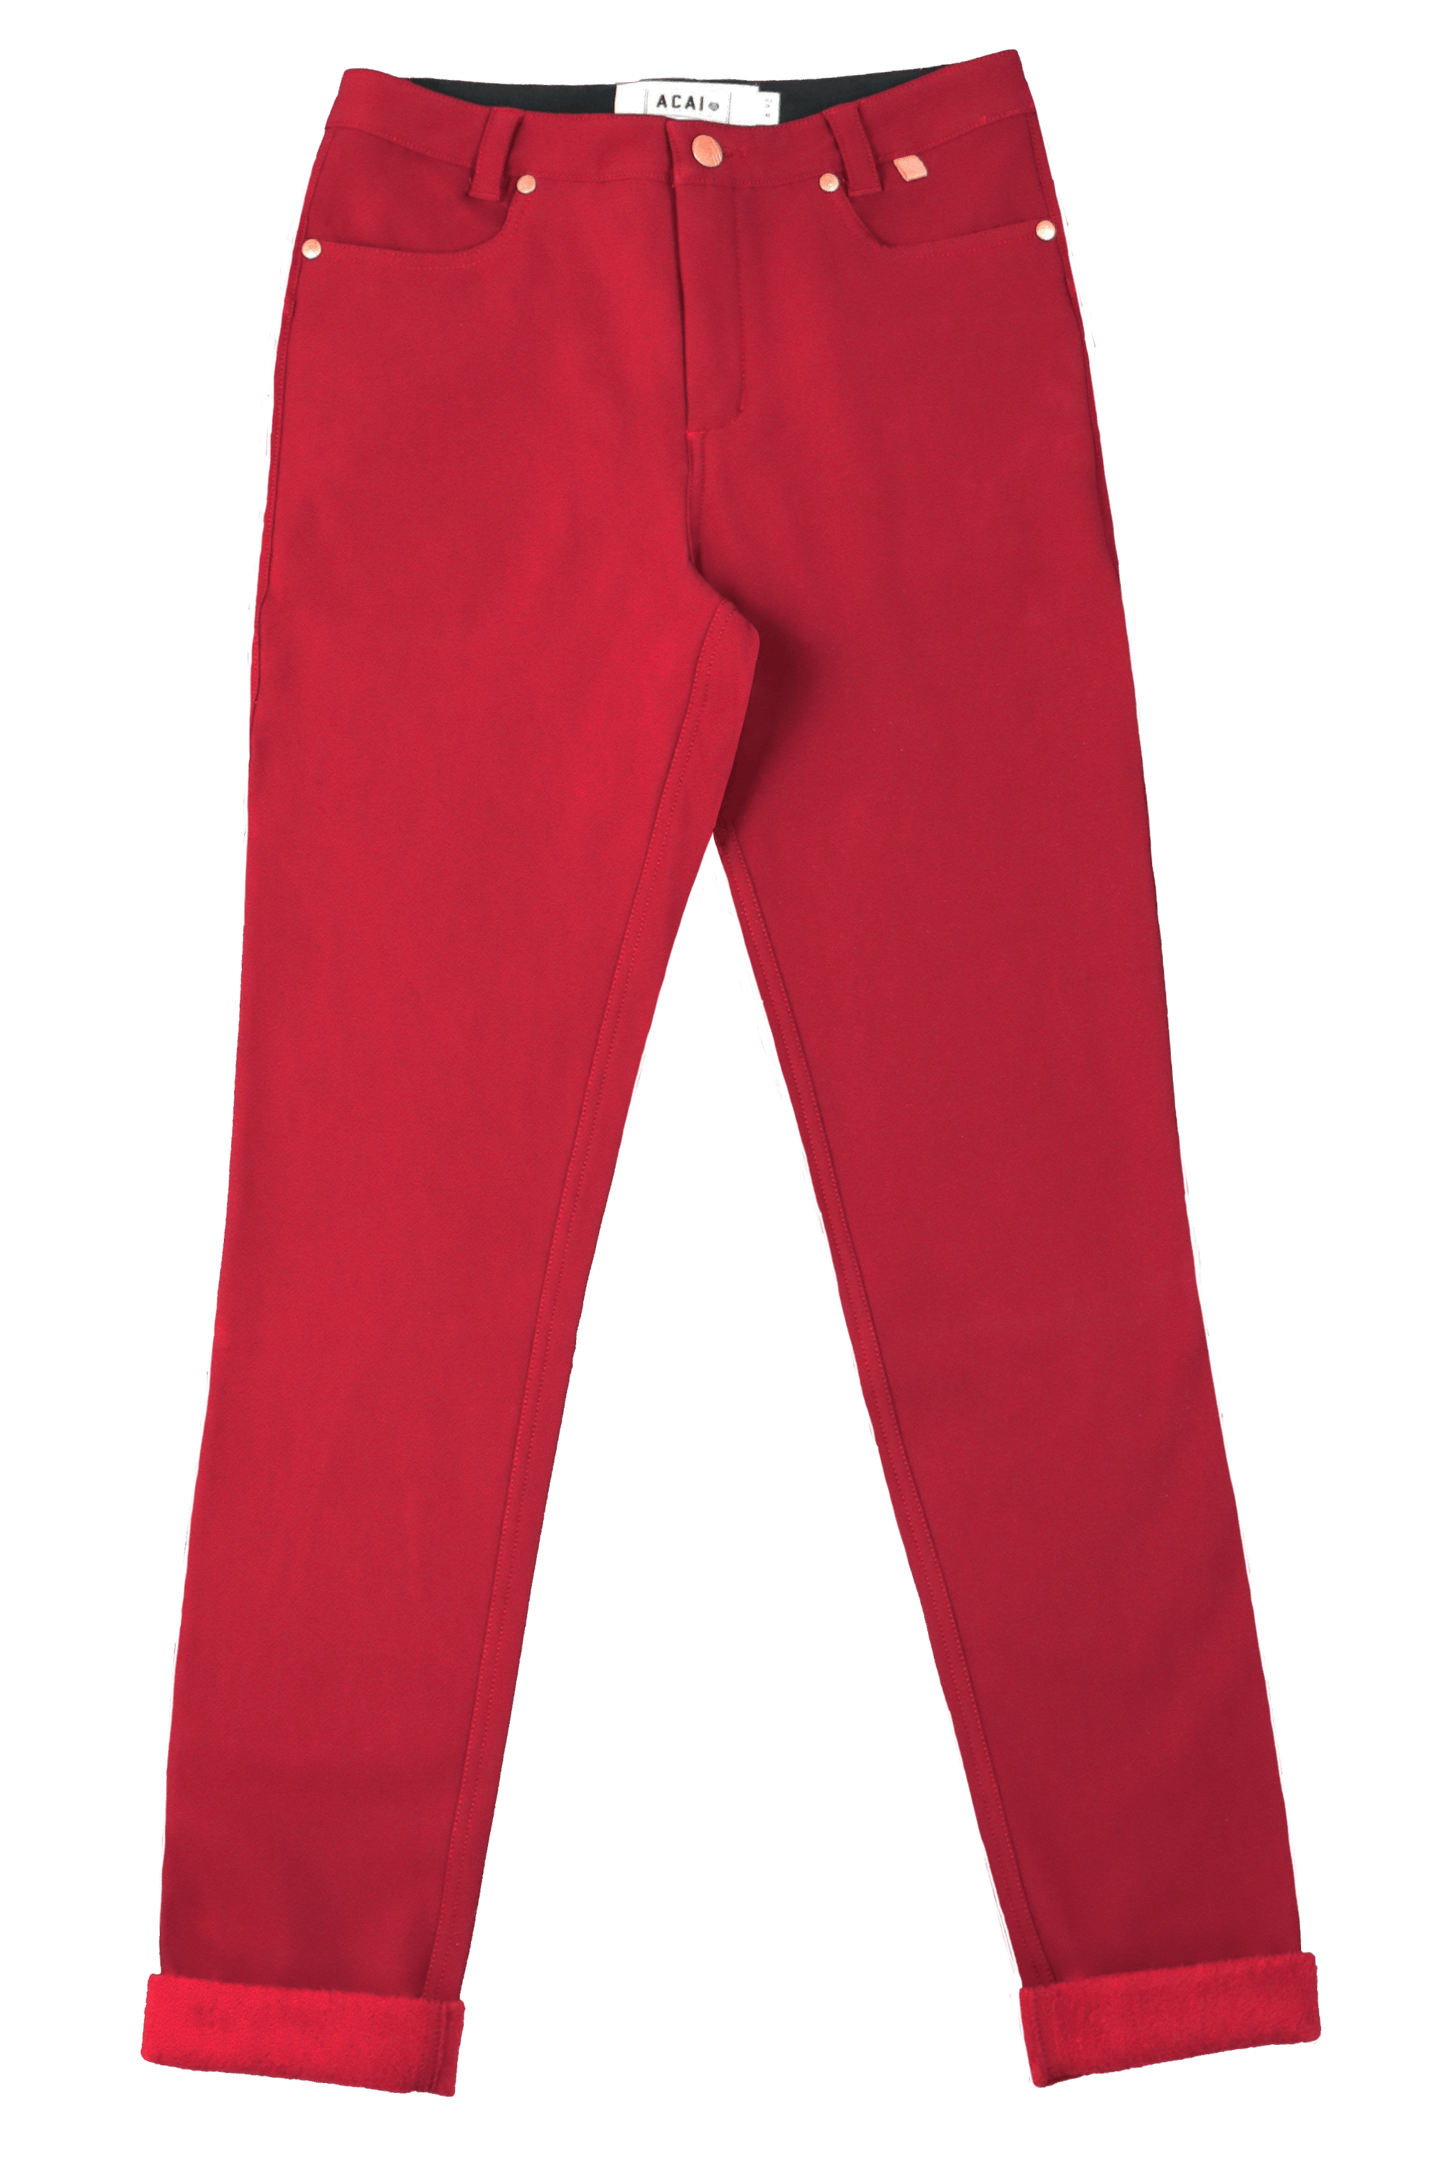 Winterberry Thermal Skinny Outdoor Trousers, £84